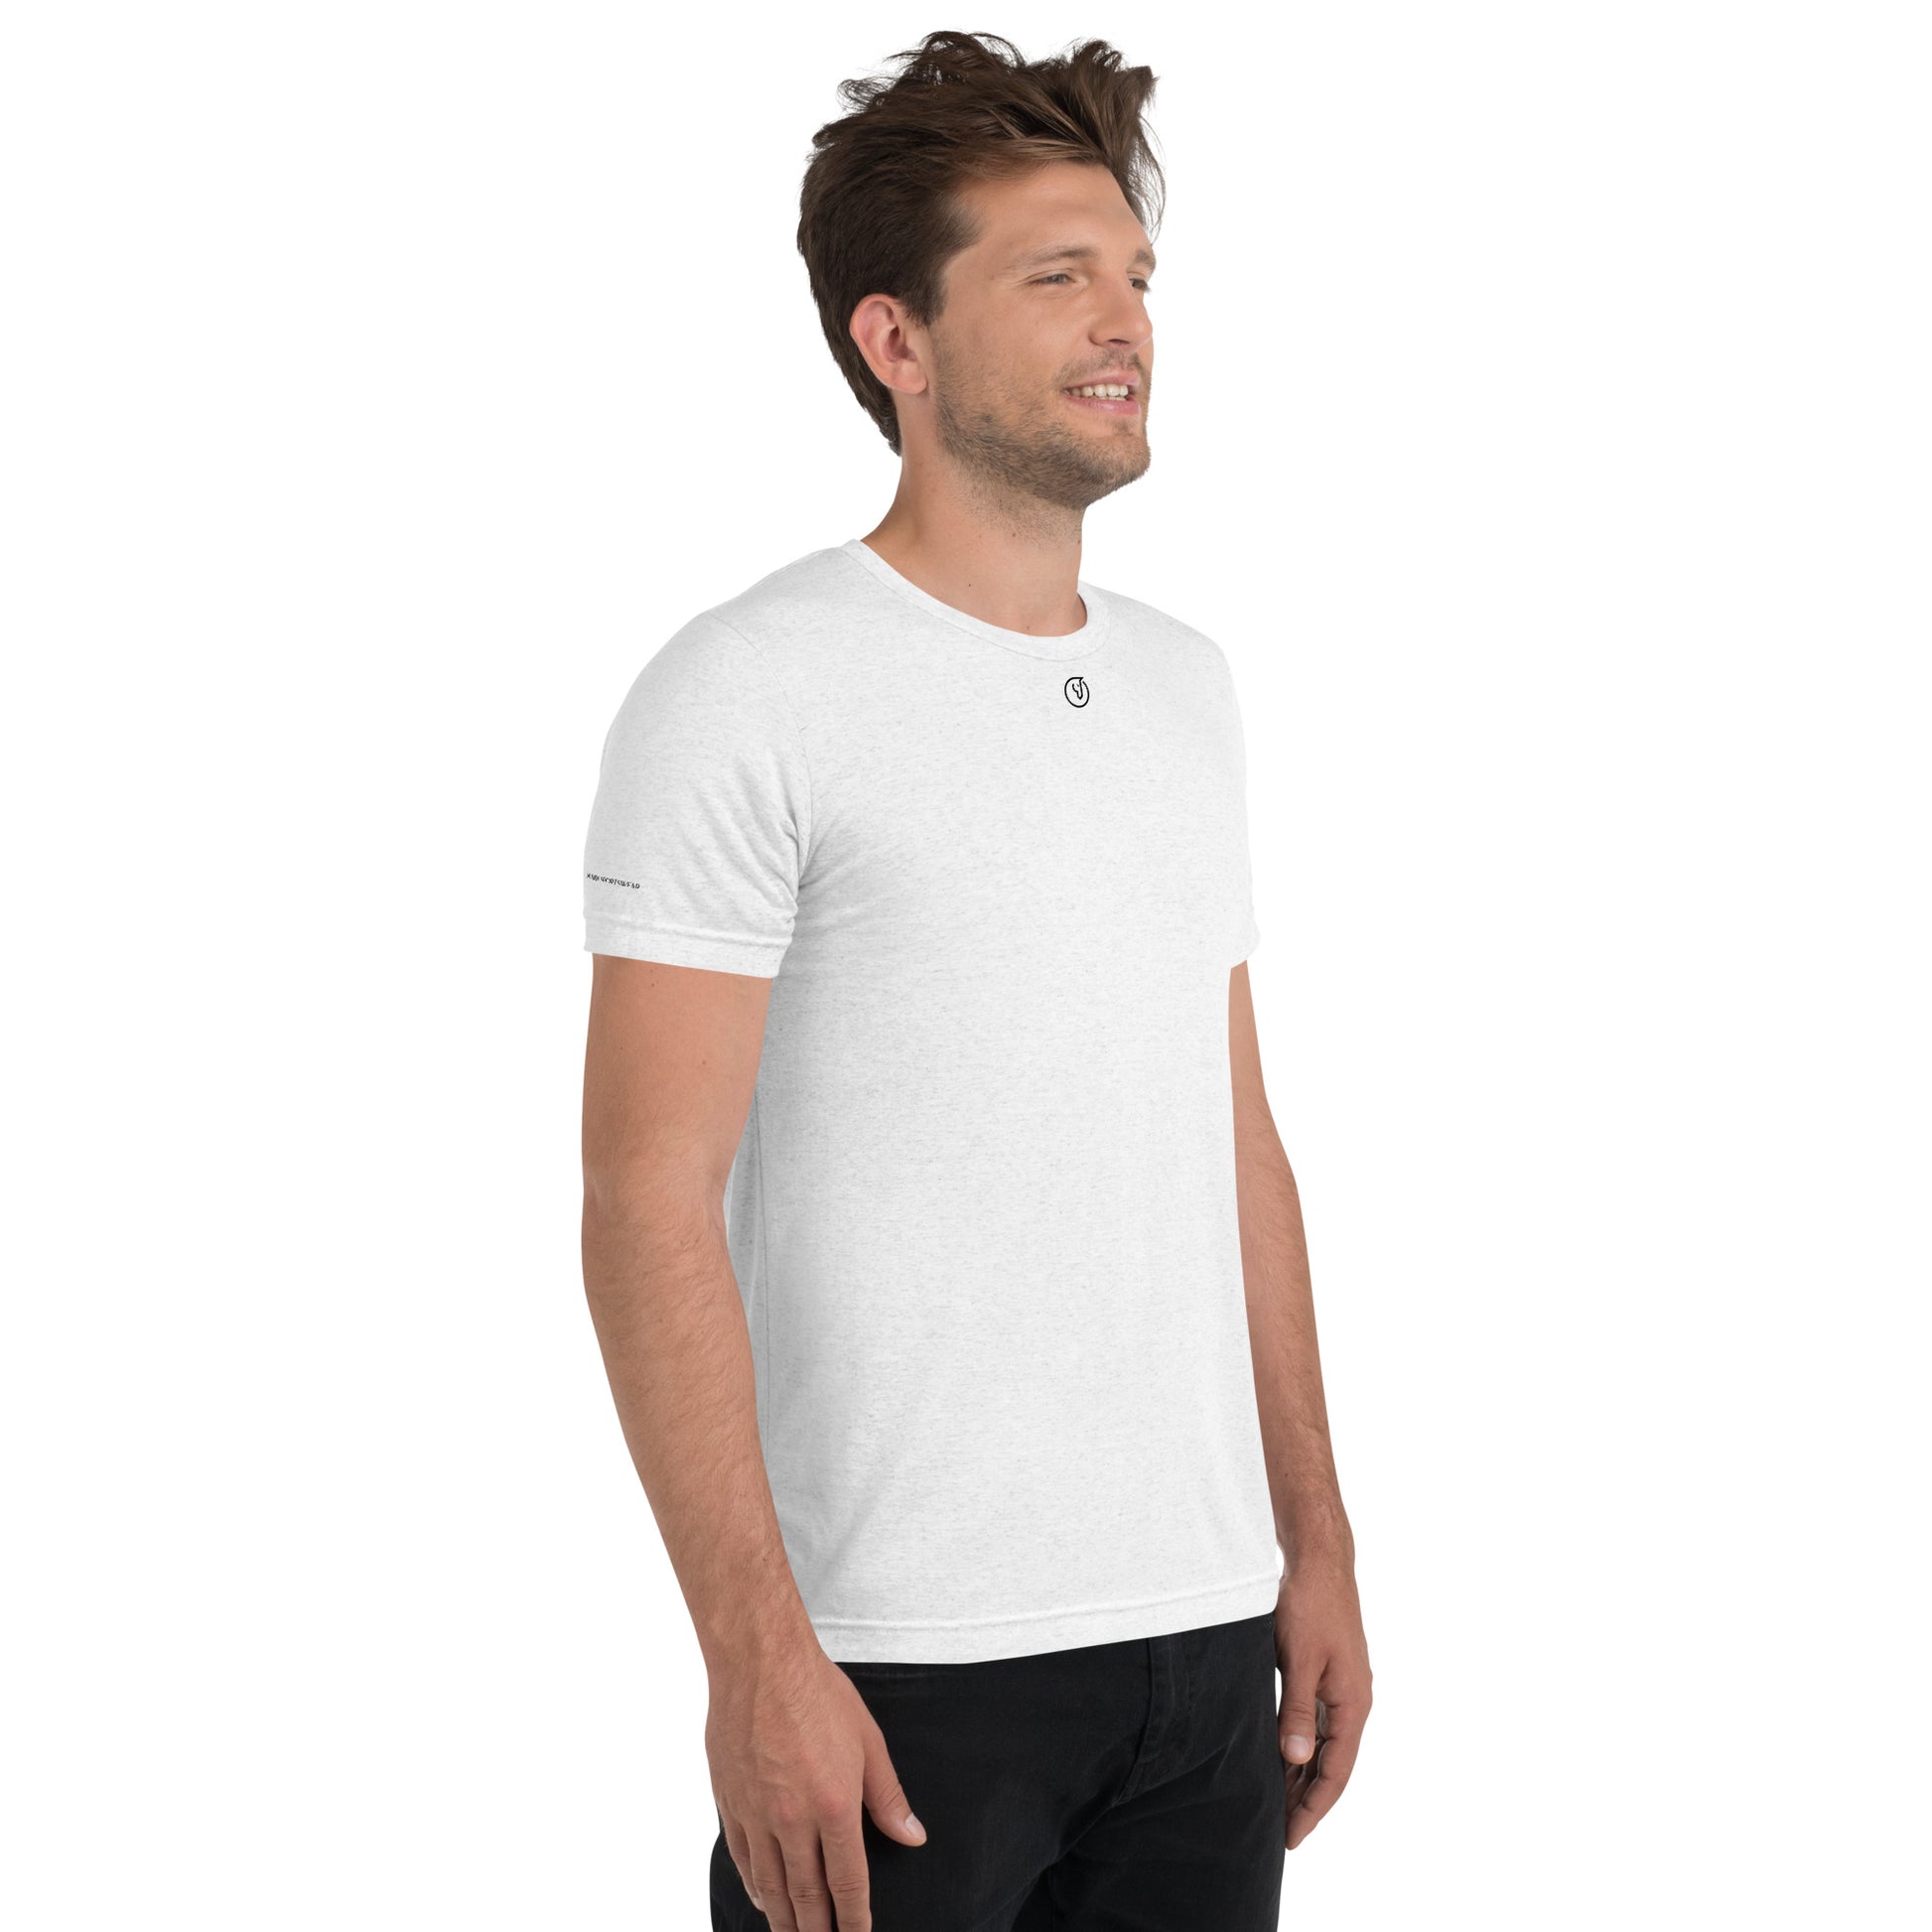 Humble Sportswear, men's white tri-blend active and casual wear t-shirts 